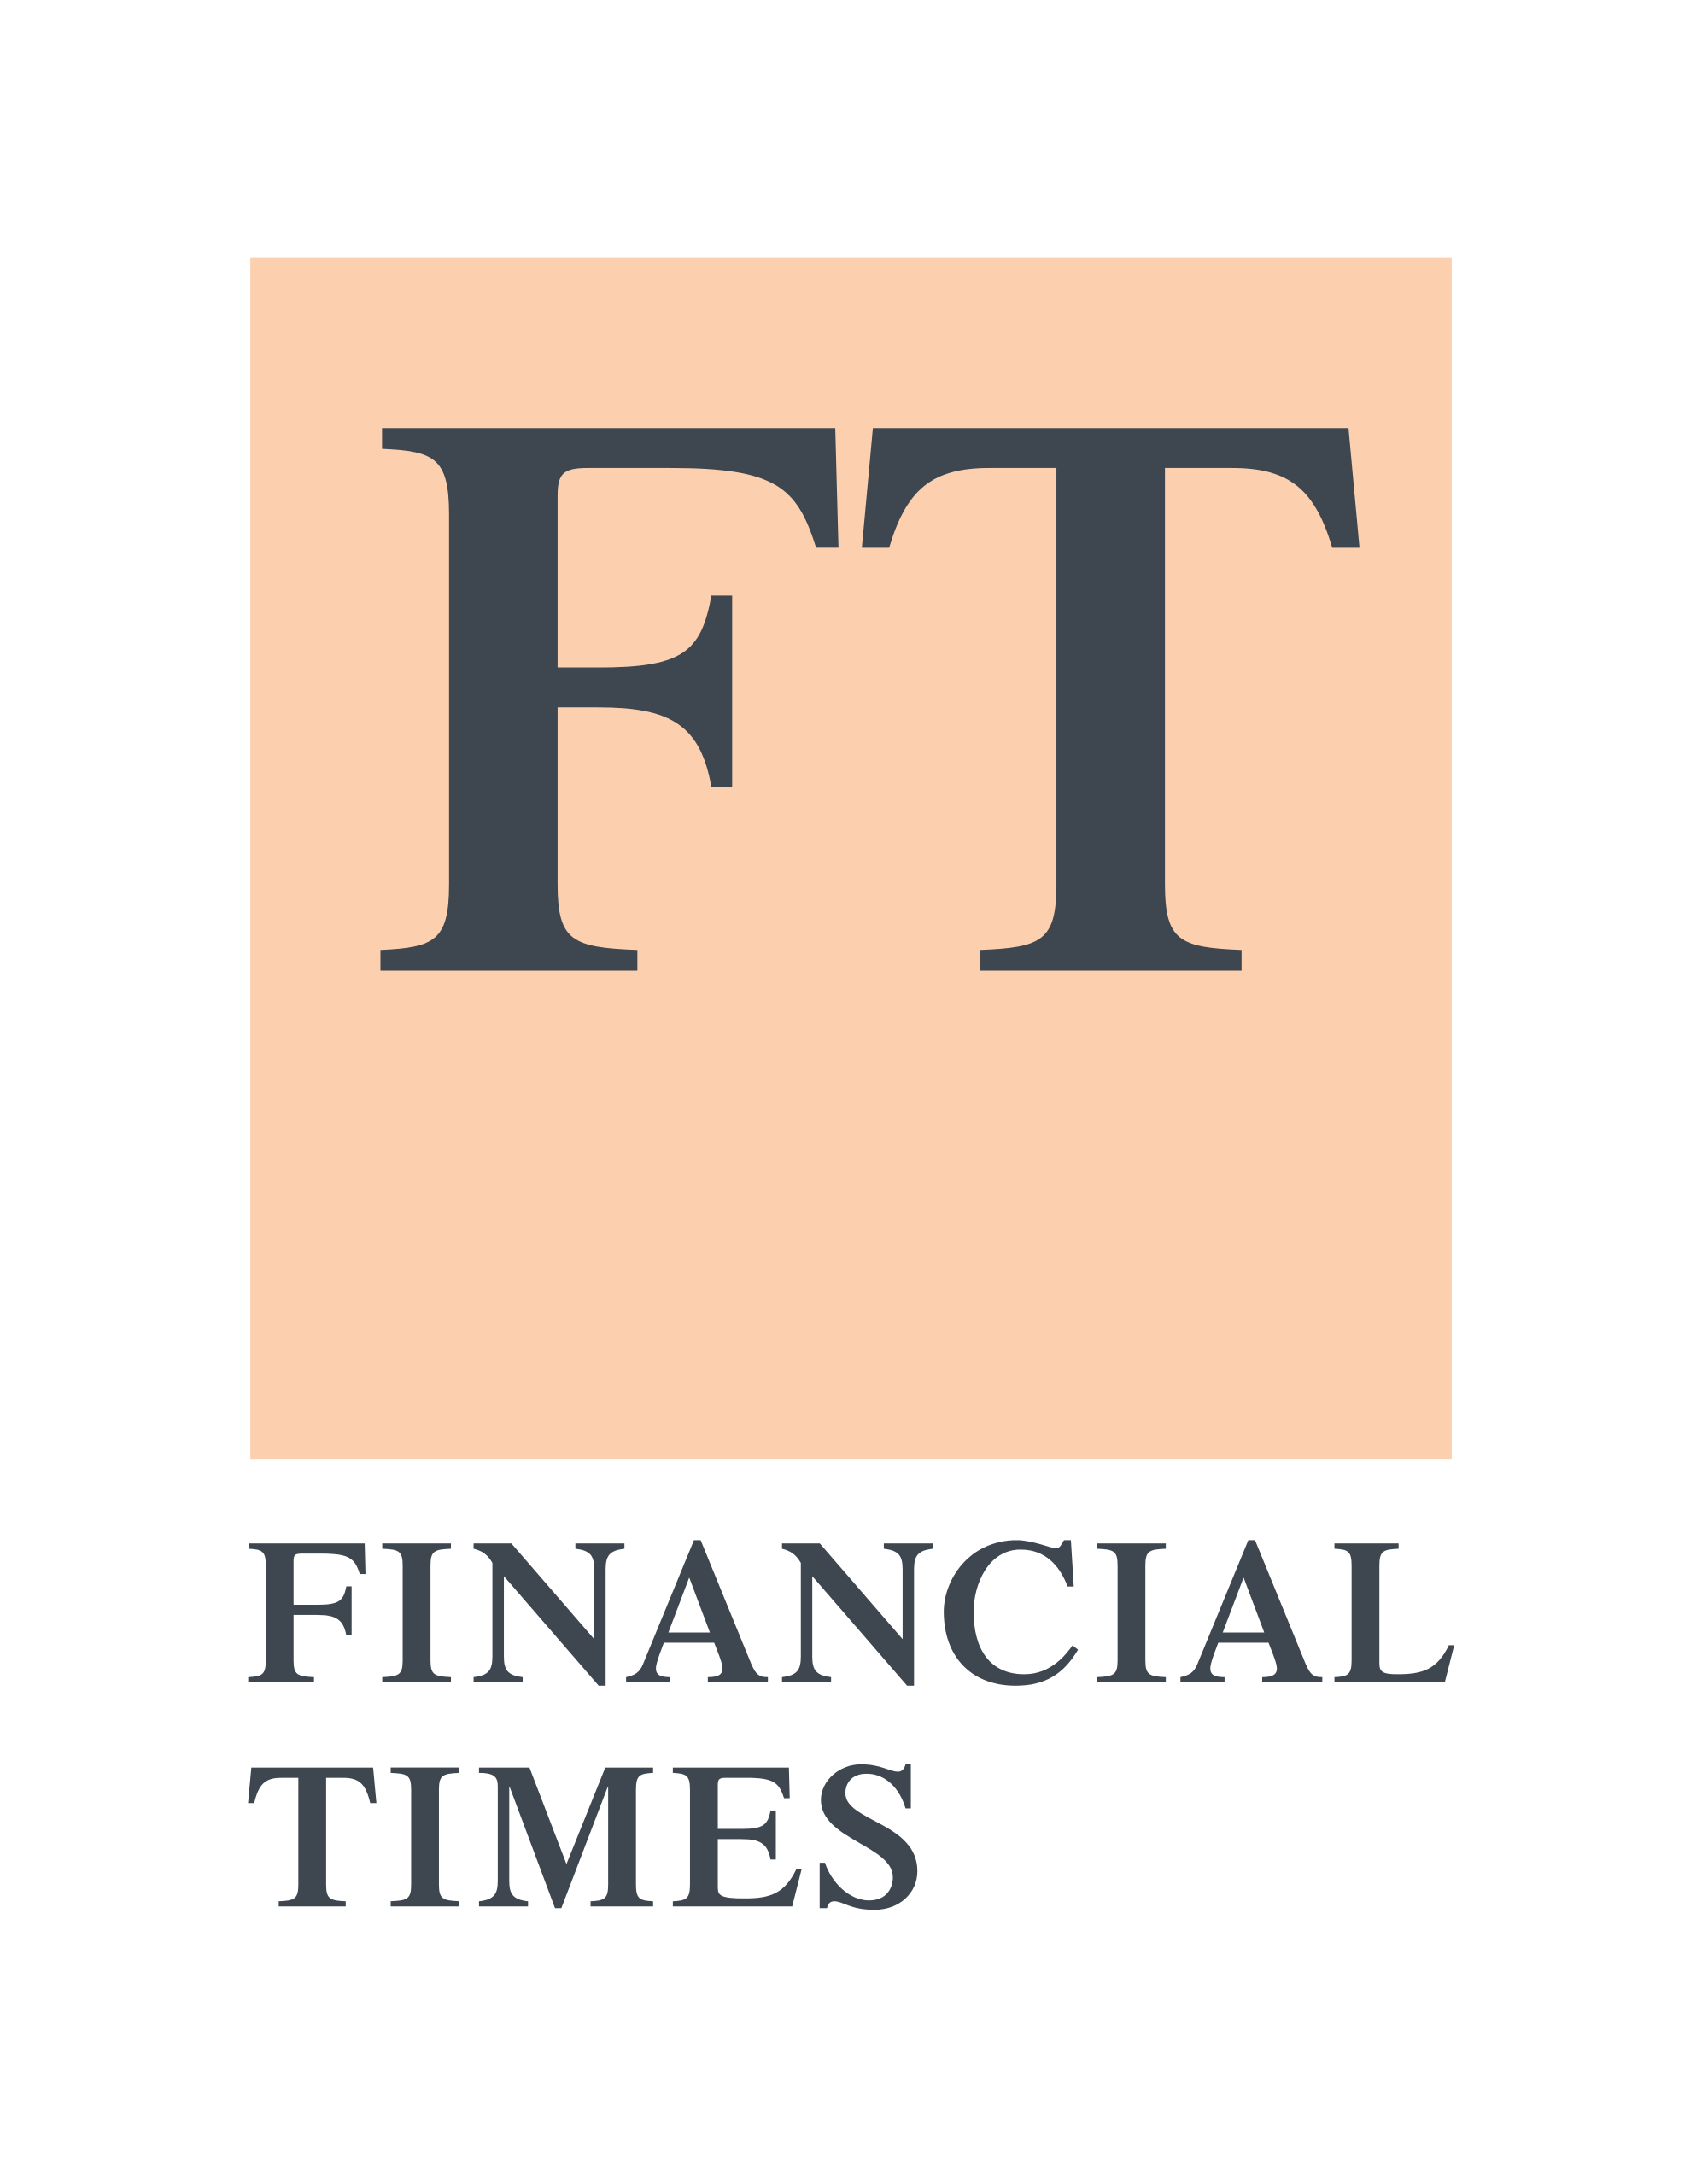 SG - Case Study - Pearson - Cultural Change & Performance Management - Financial Times